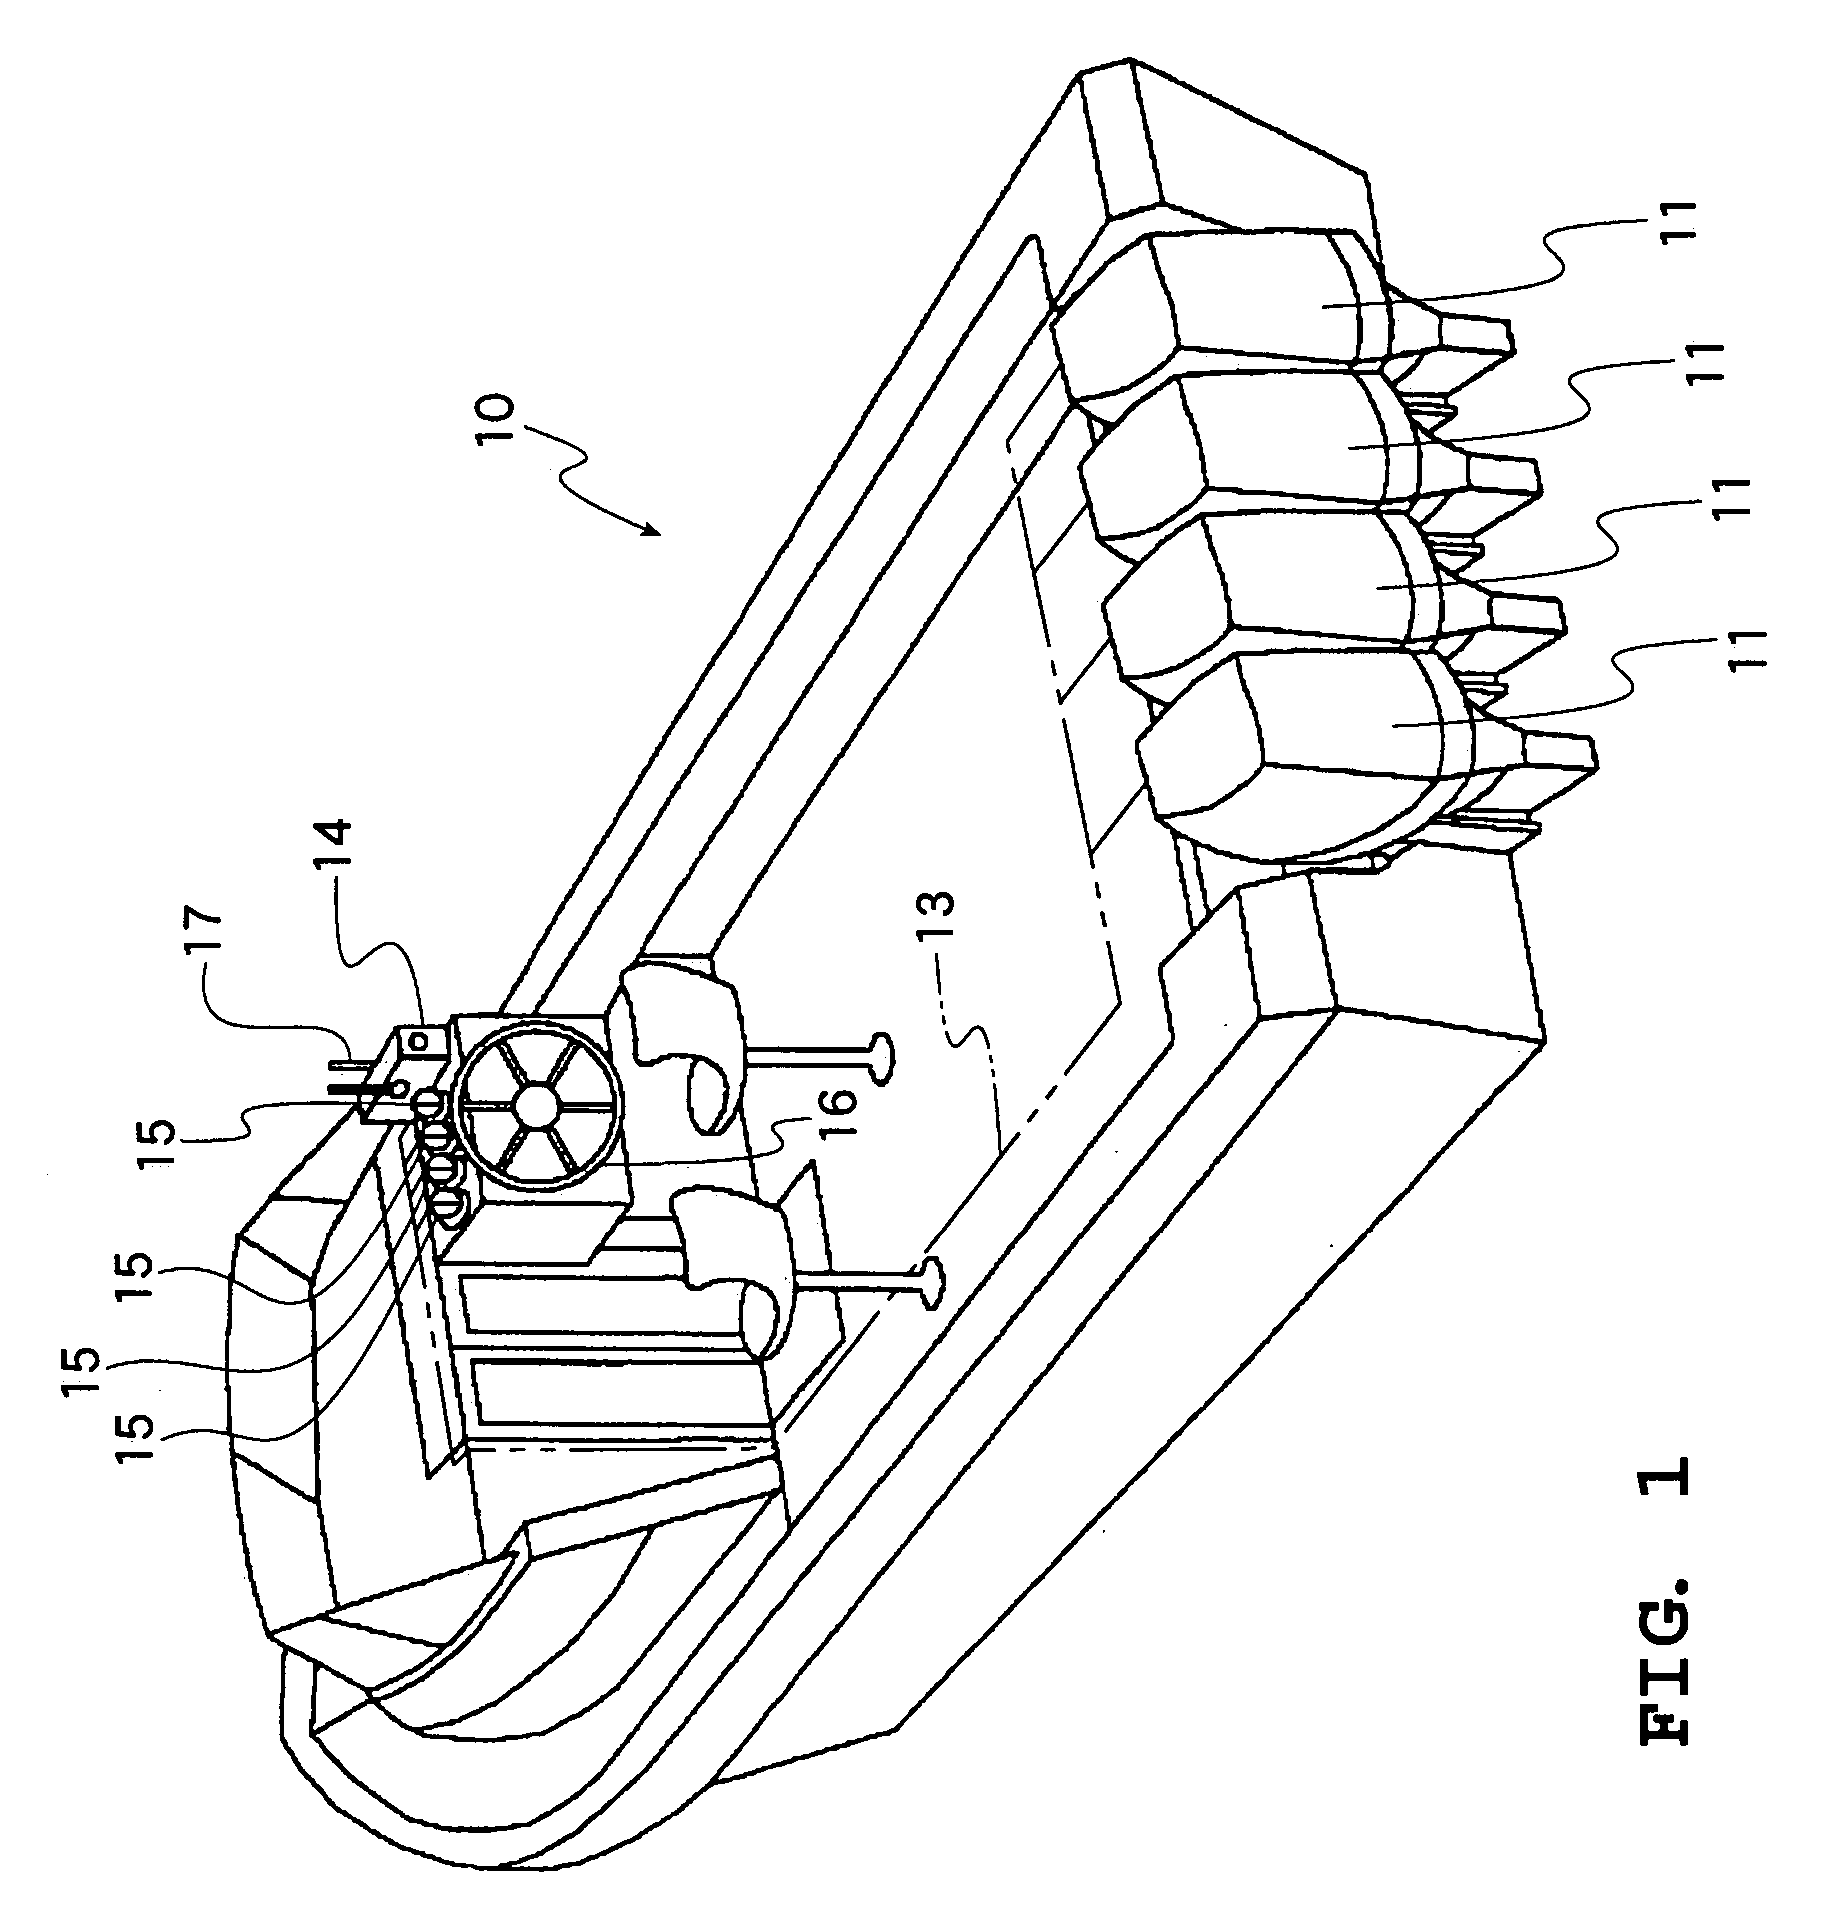 Trim angle correction indicating system for outboard motor